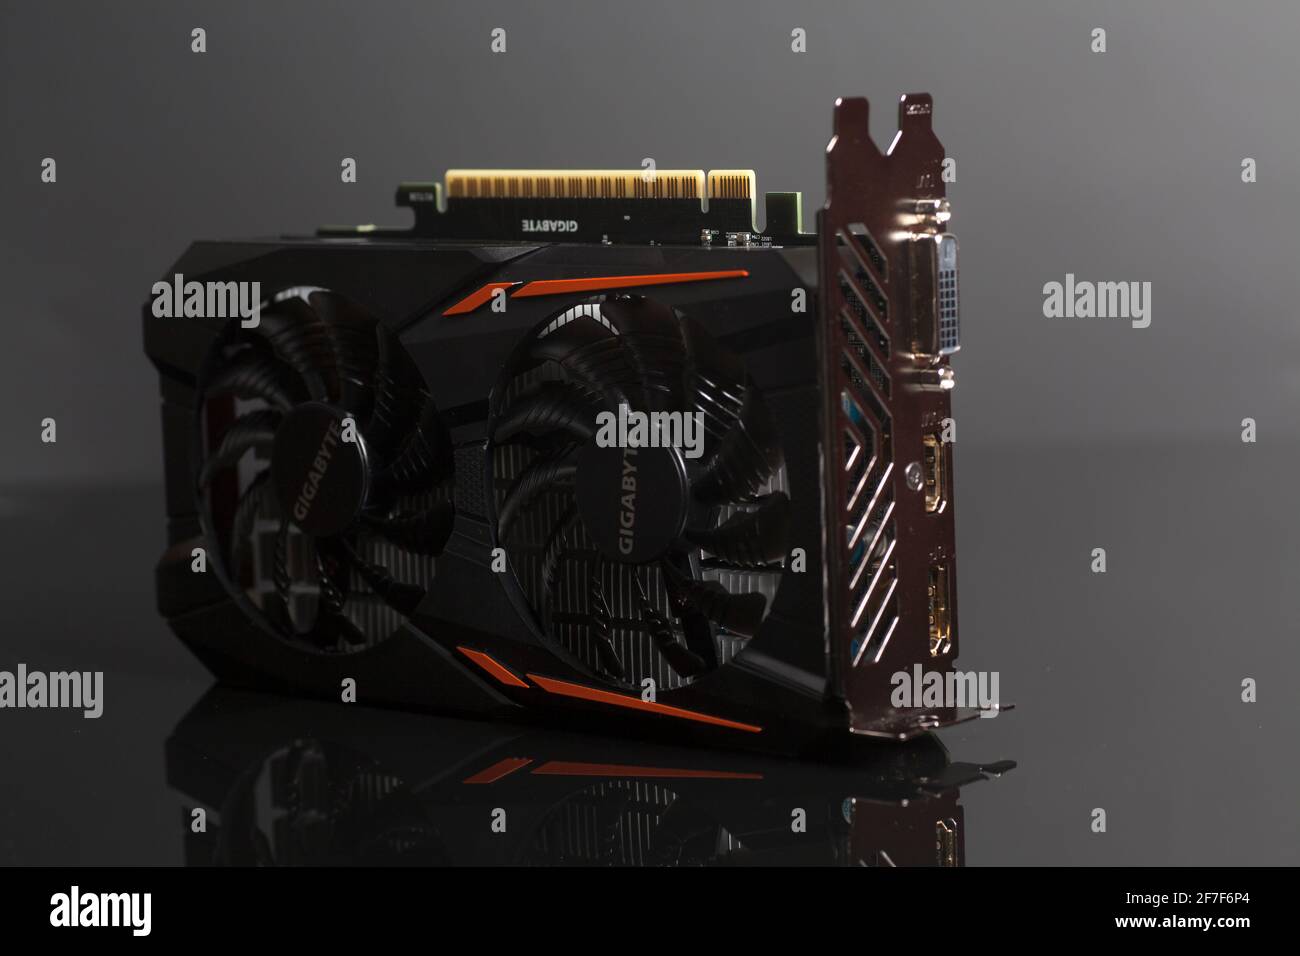 Moscow, Russia April 07,2021 Graphic video card GigaByte GeForce GTX 1050 Ti  Stock Photo - Alamy